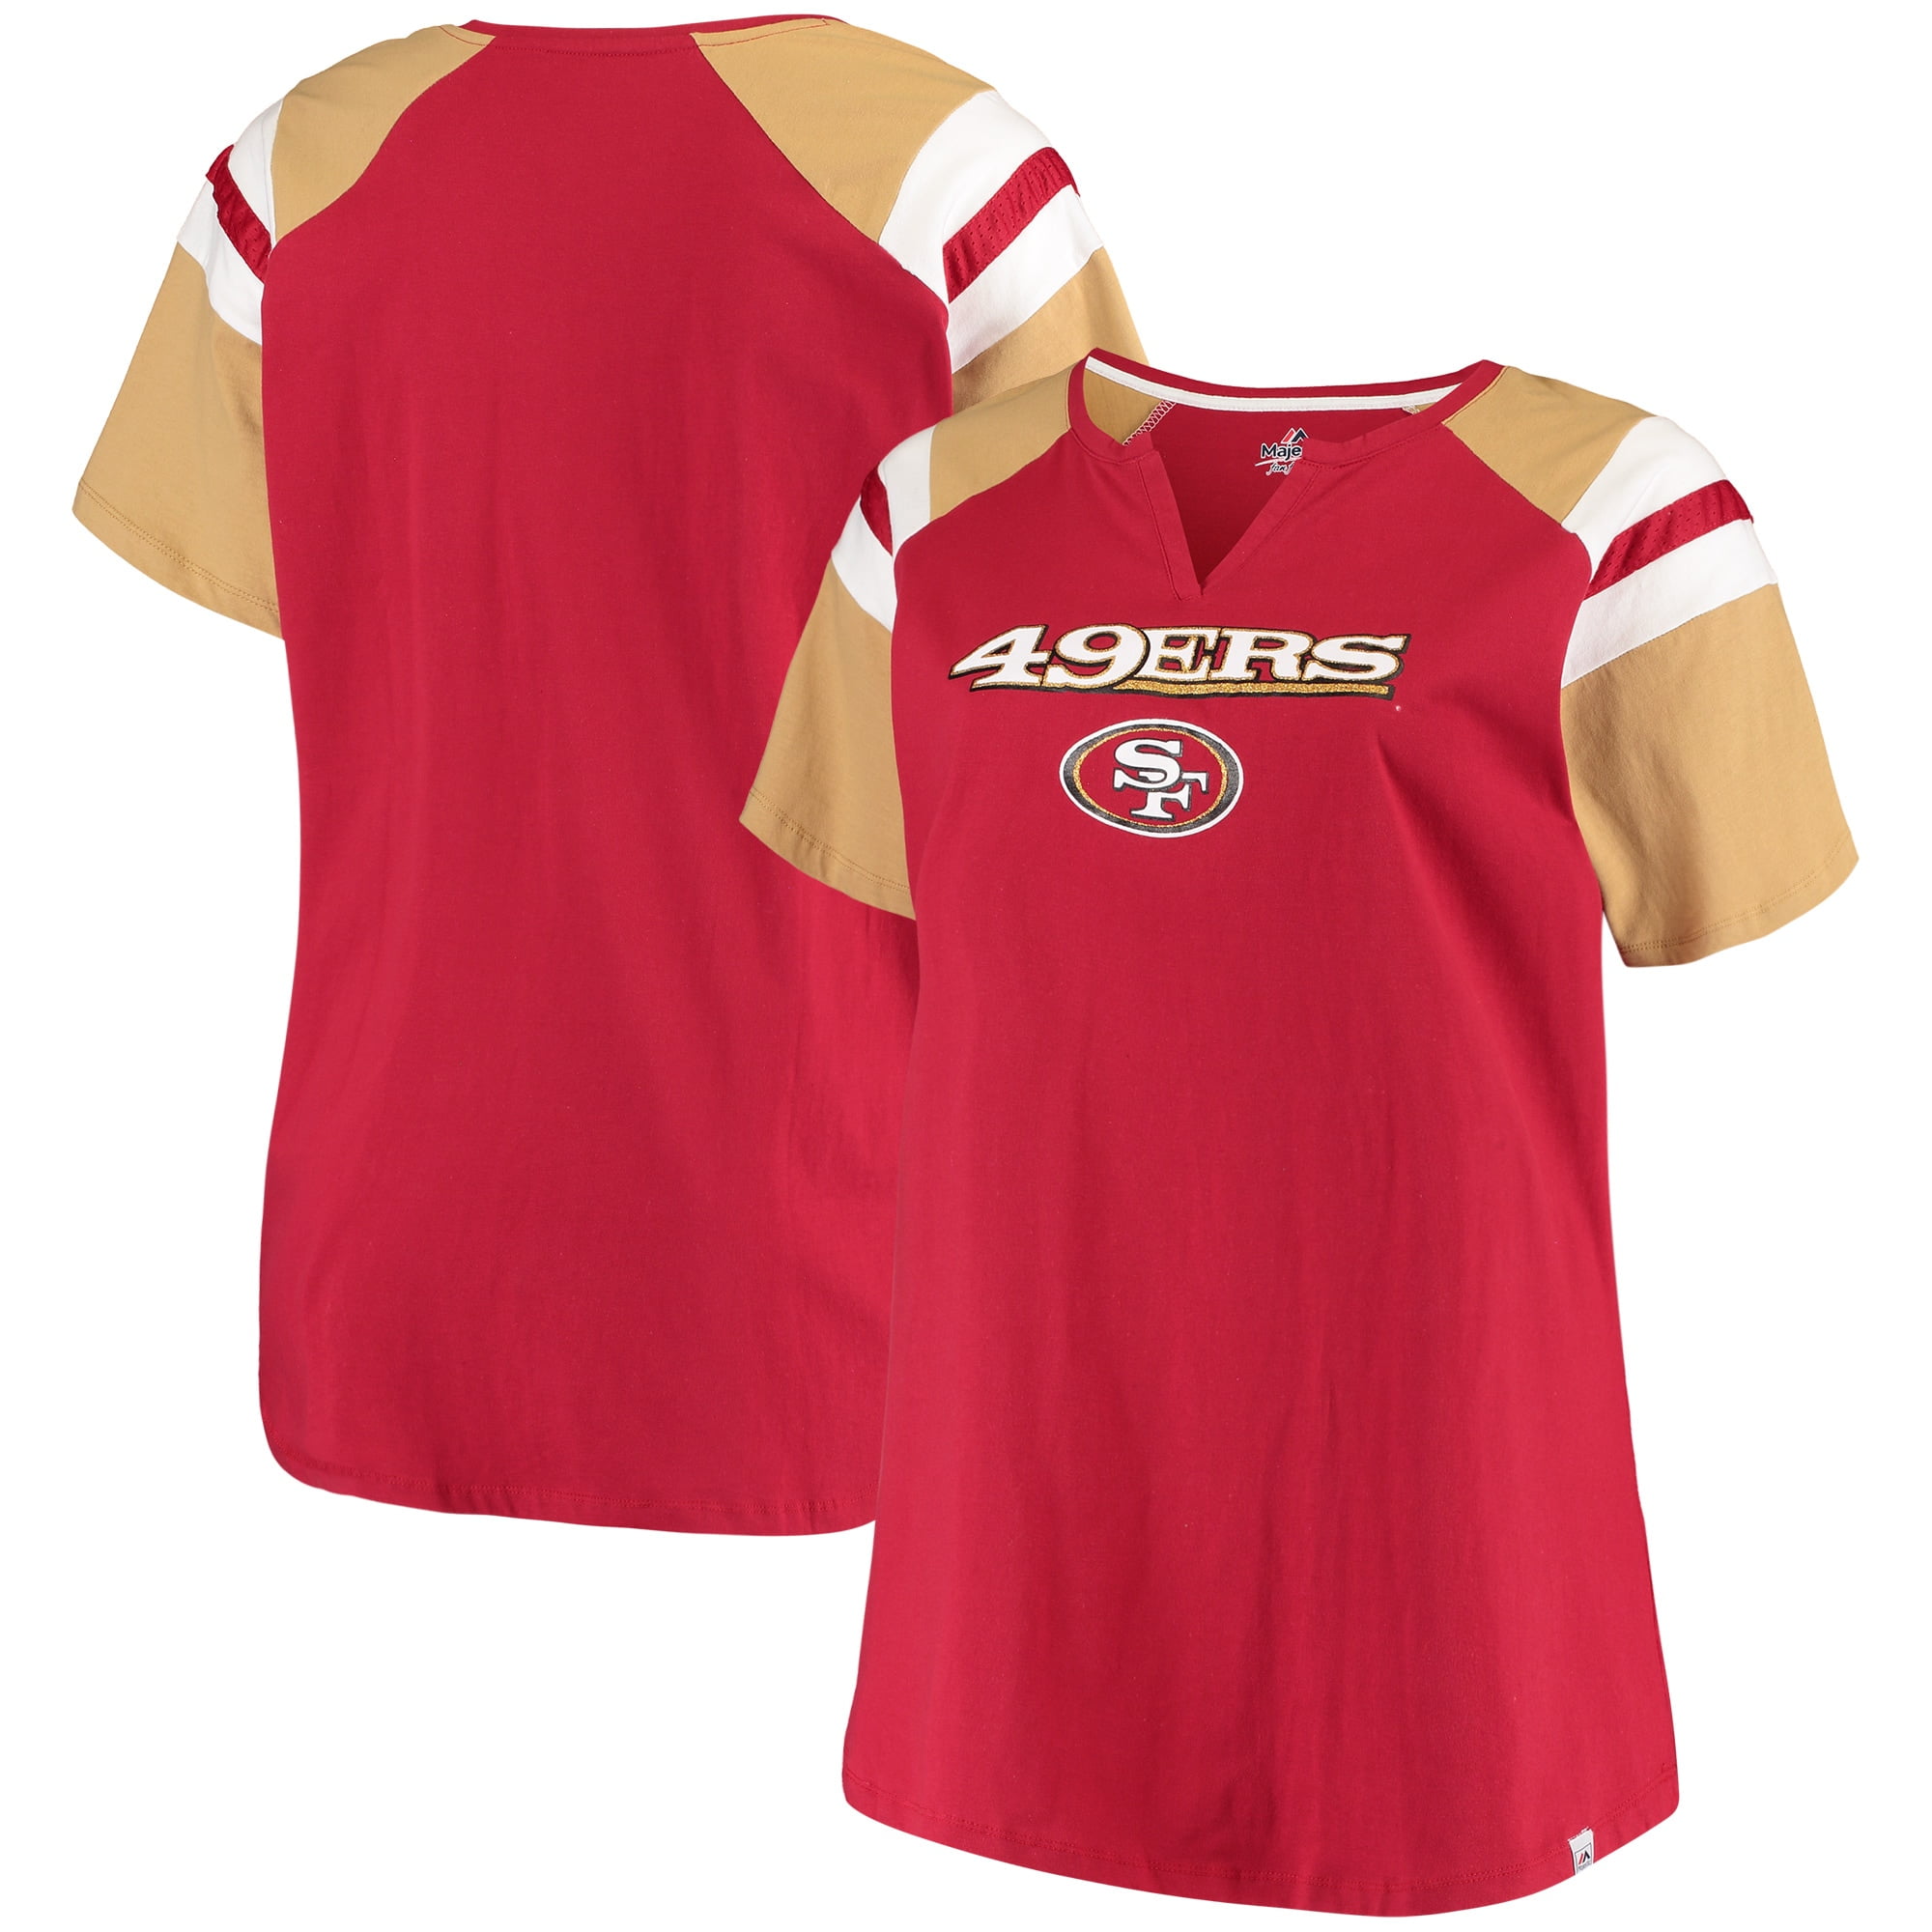 gold 49ers jersey